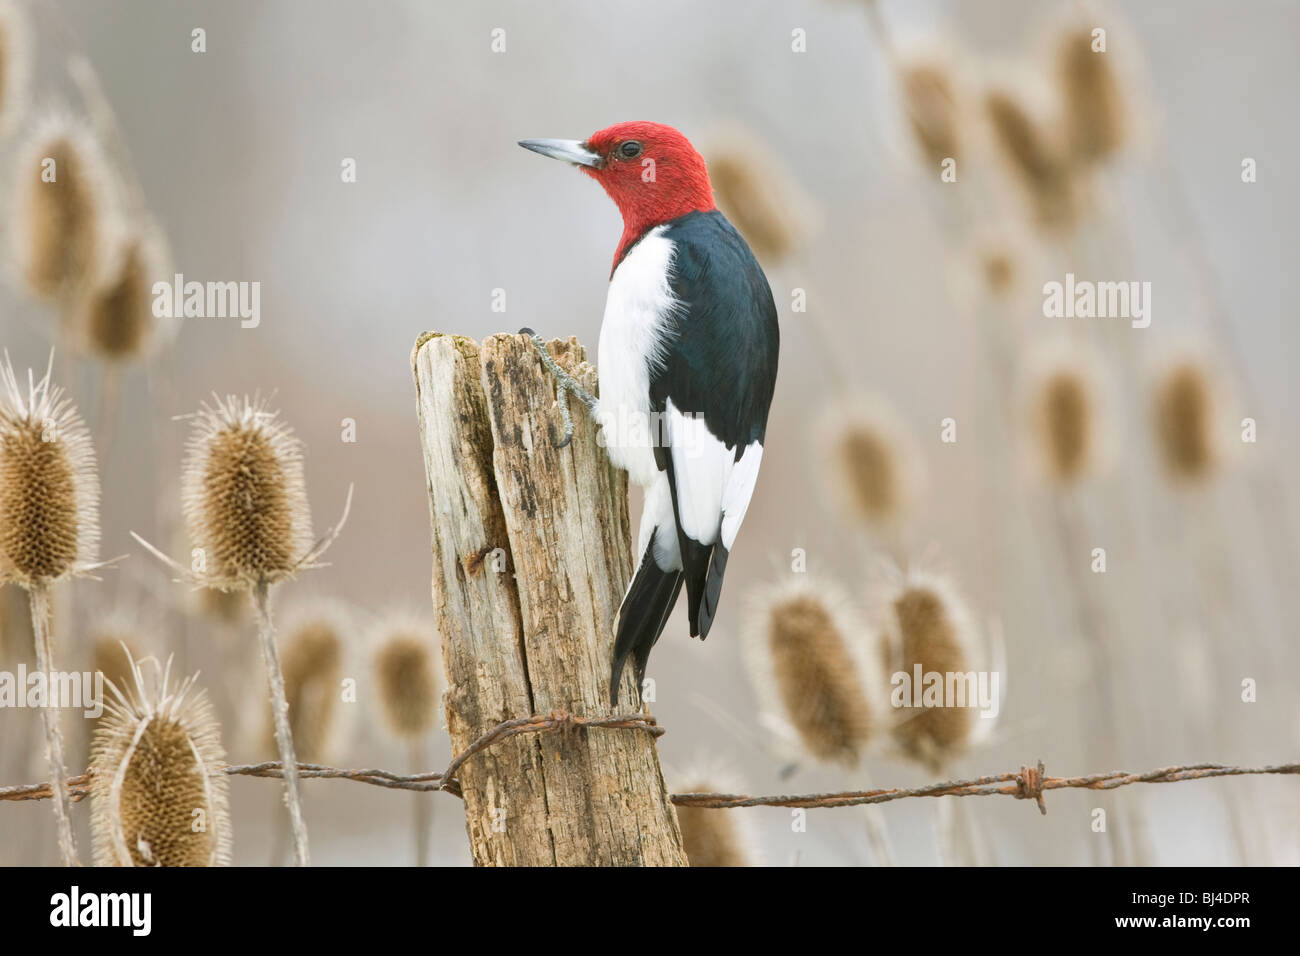 Red-headed Woodpecker on Fence Post Stock Photo